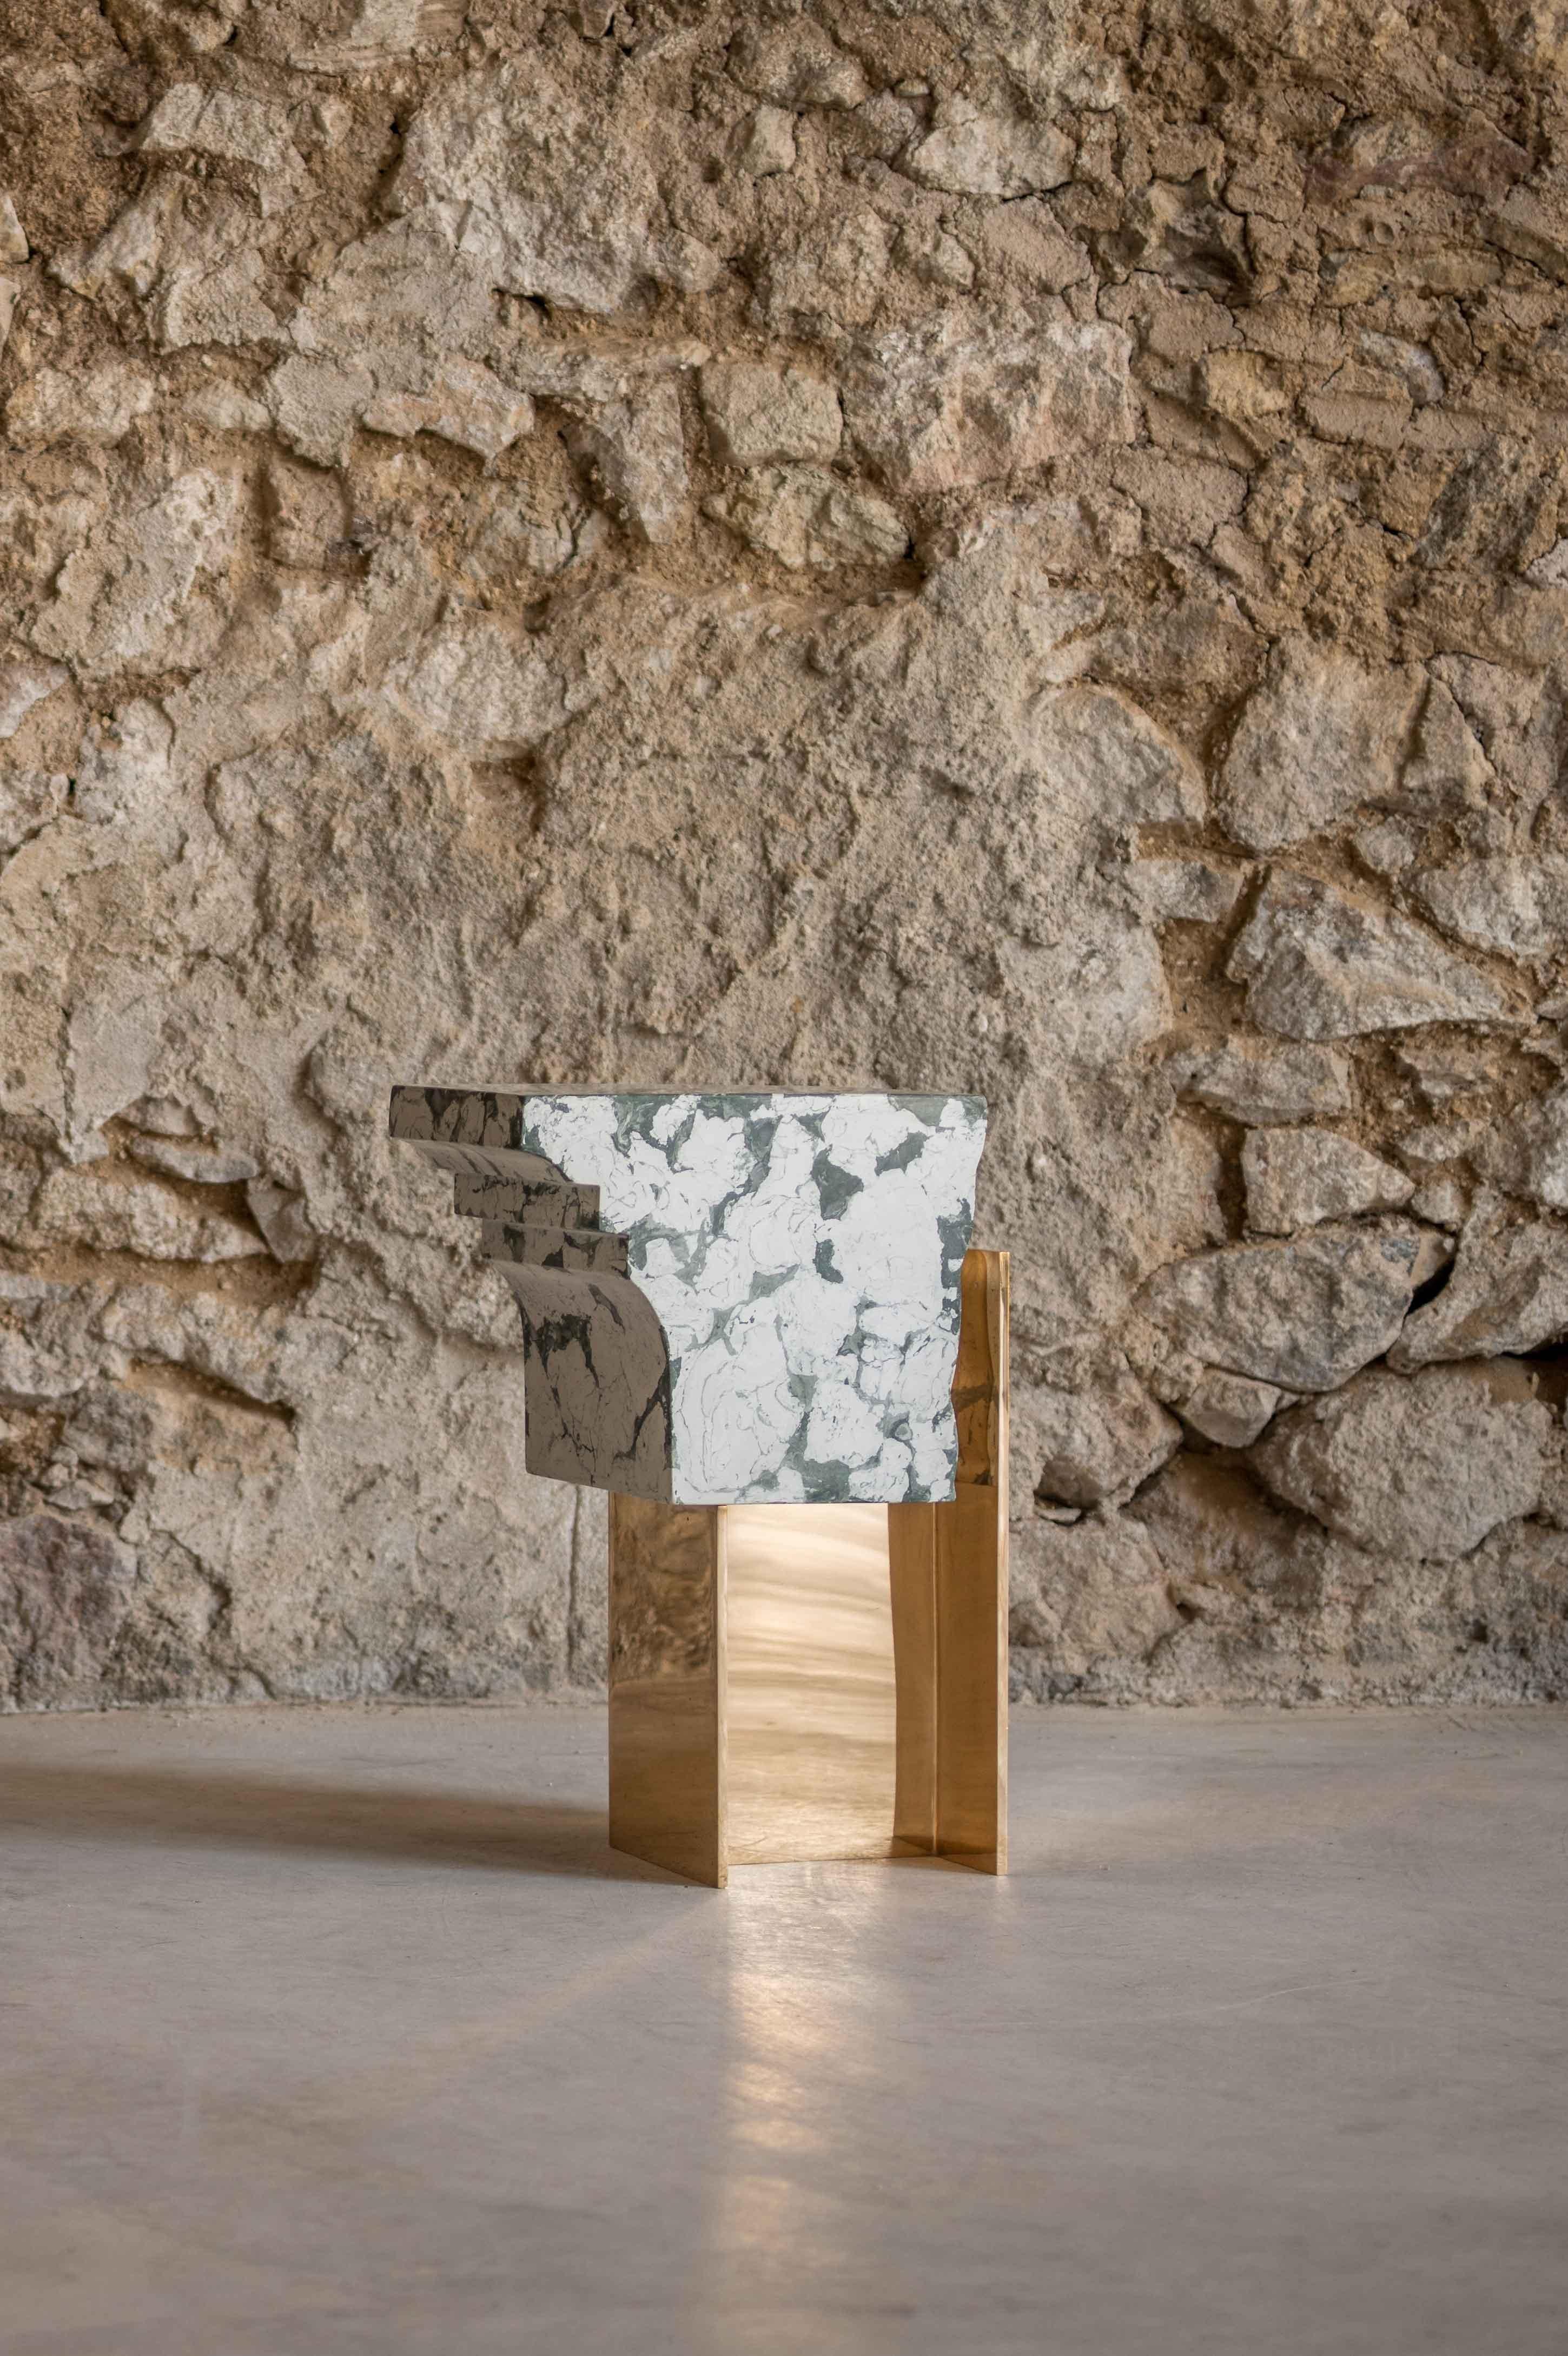 Ruins by Roberto Sironi is a series of works that re-signify architectural fragments belonging to different historical periods and great archaeological sites, modelling the forms according to new aesthetic representations. The project relates